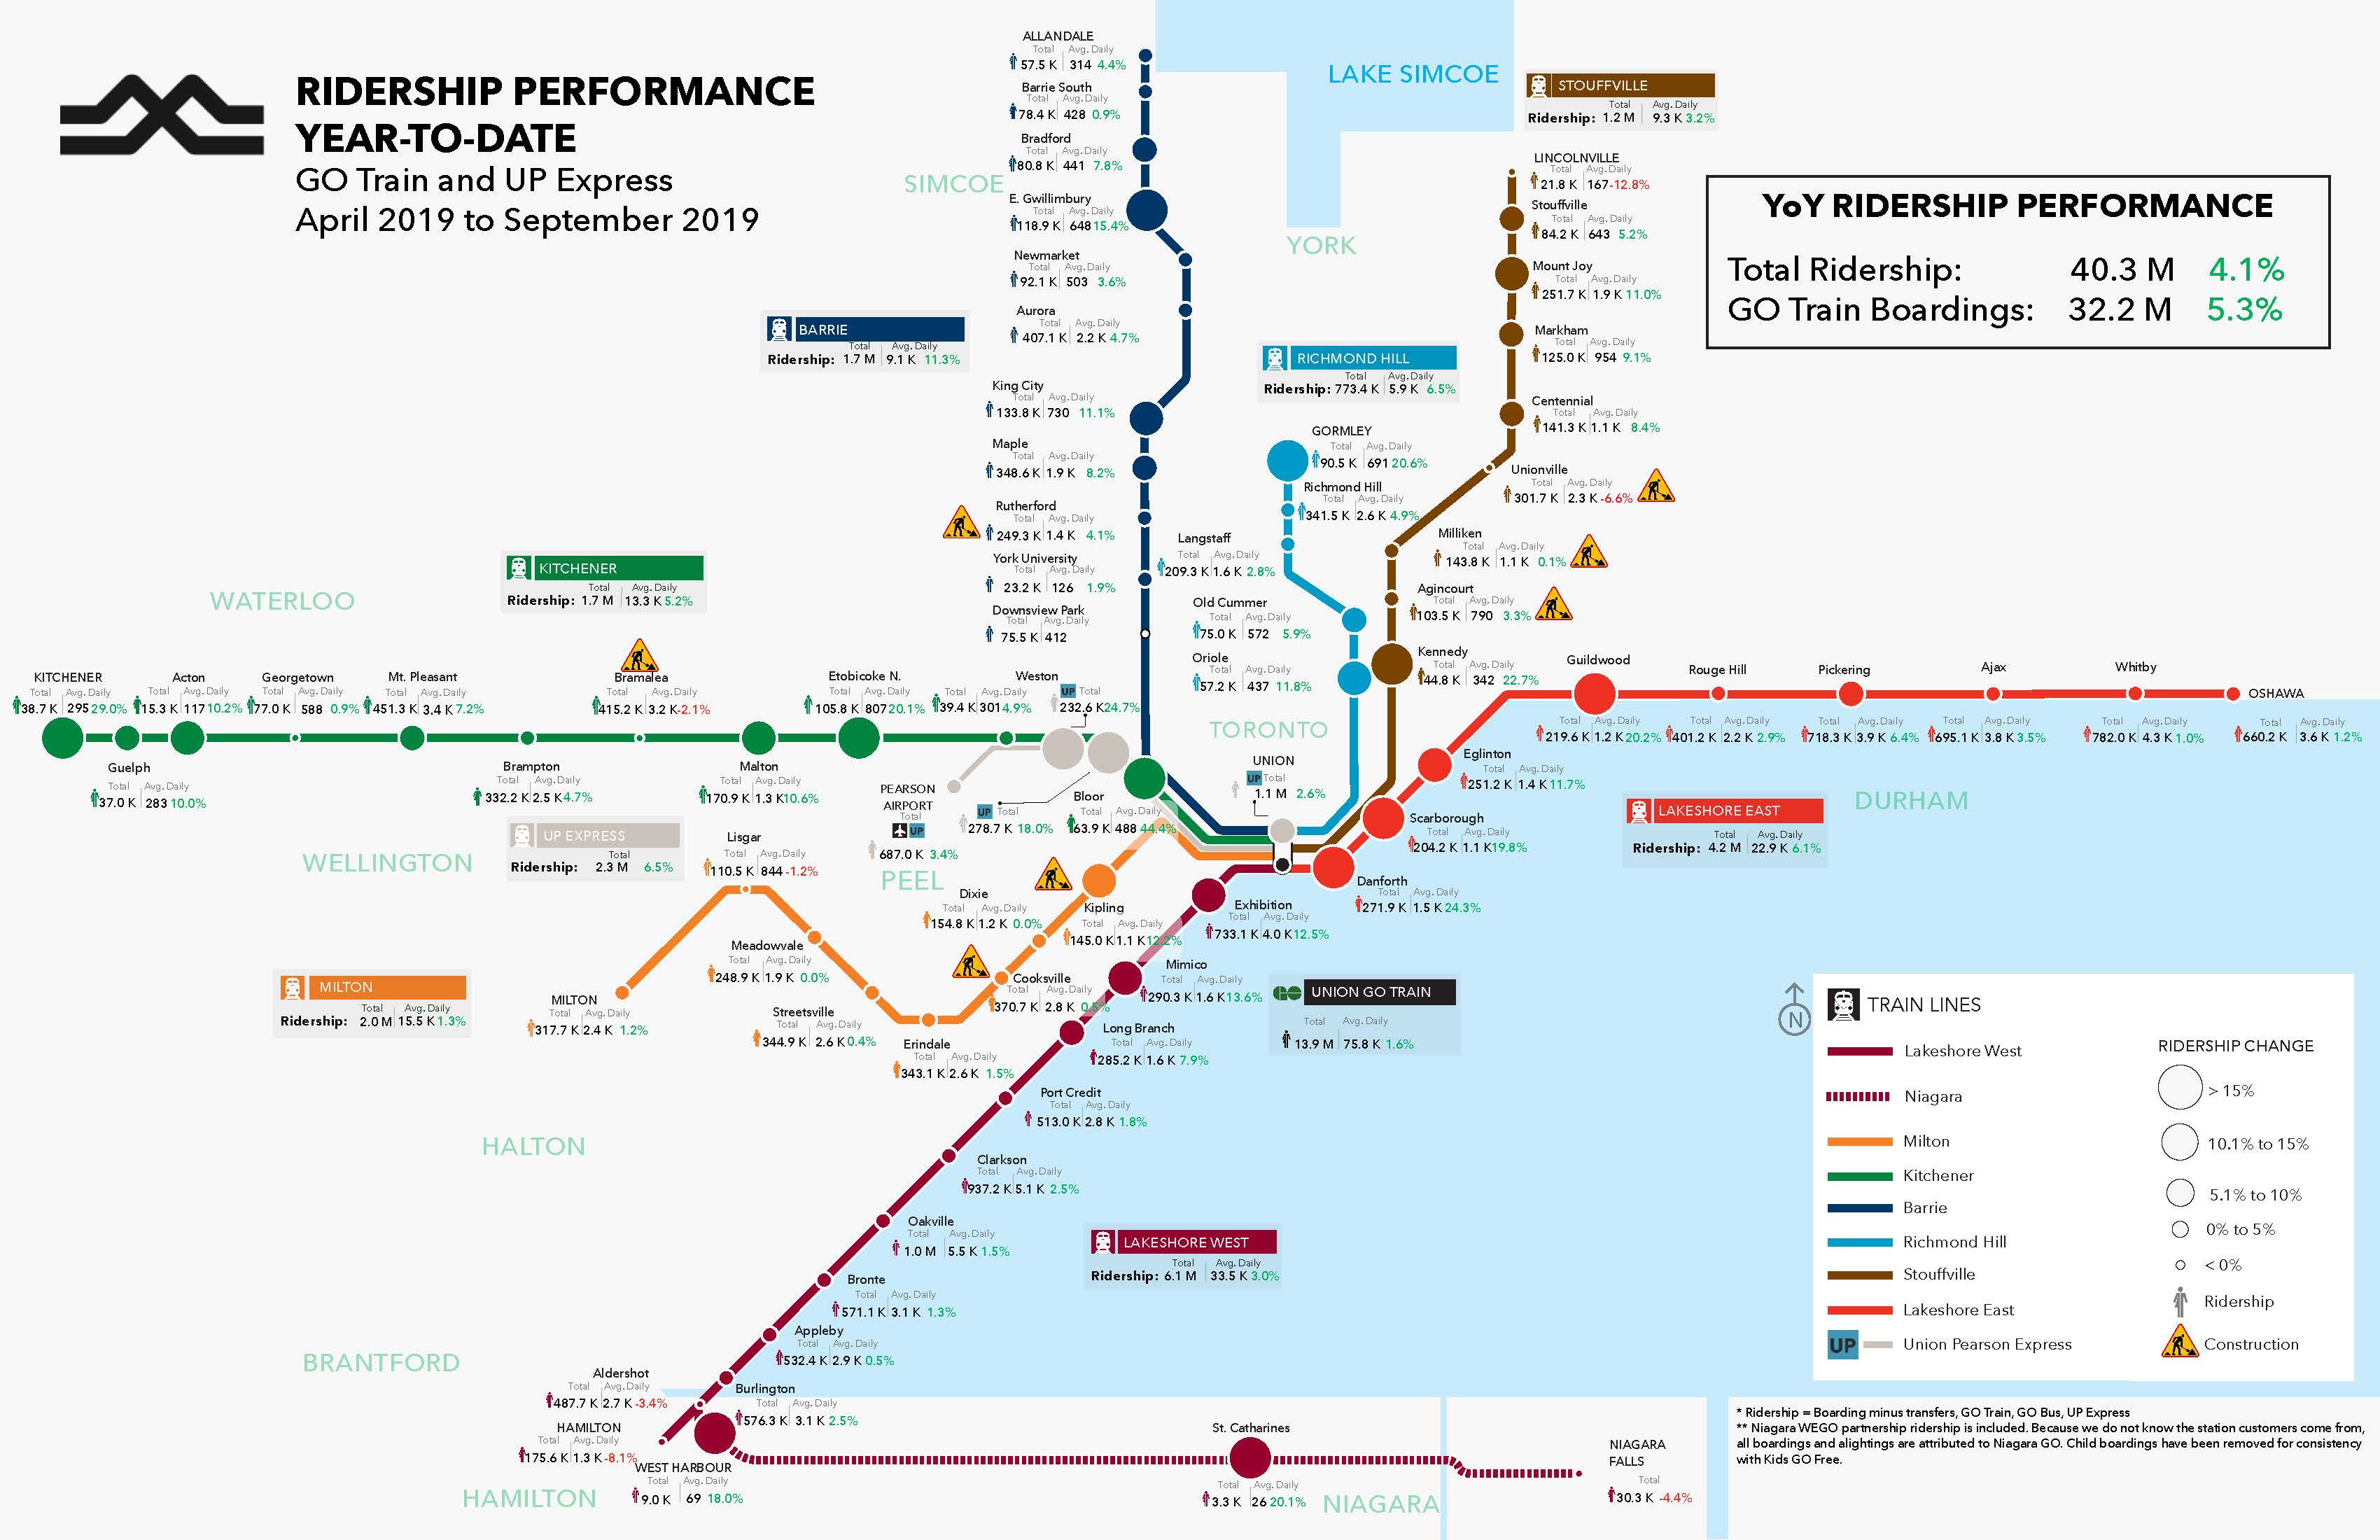 The latest ridership map shows an increase in total ridership, as well as GO train boardings.